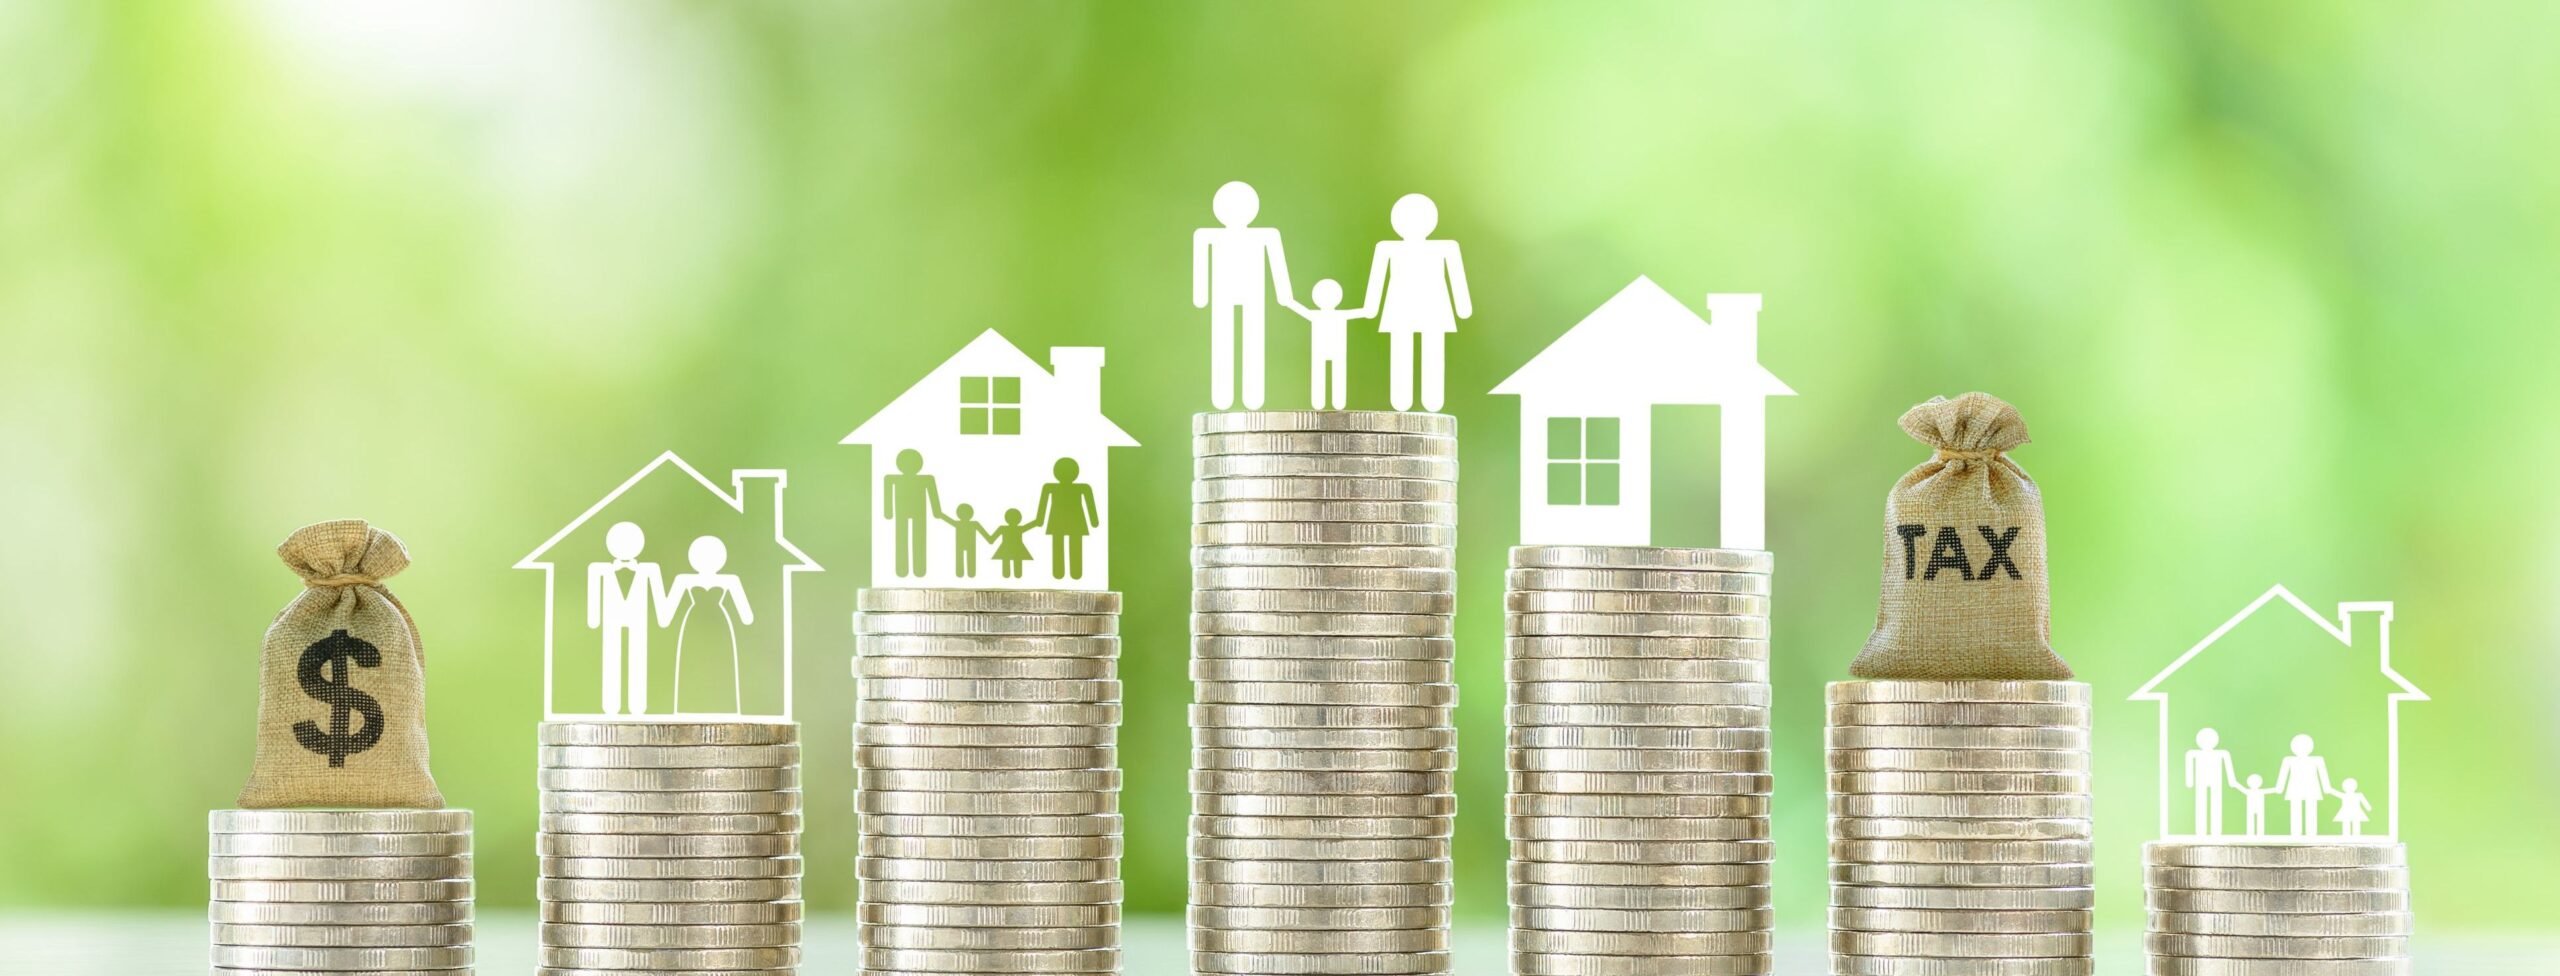 When is an inheritance taxed?